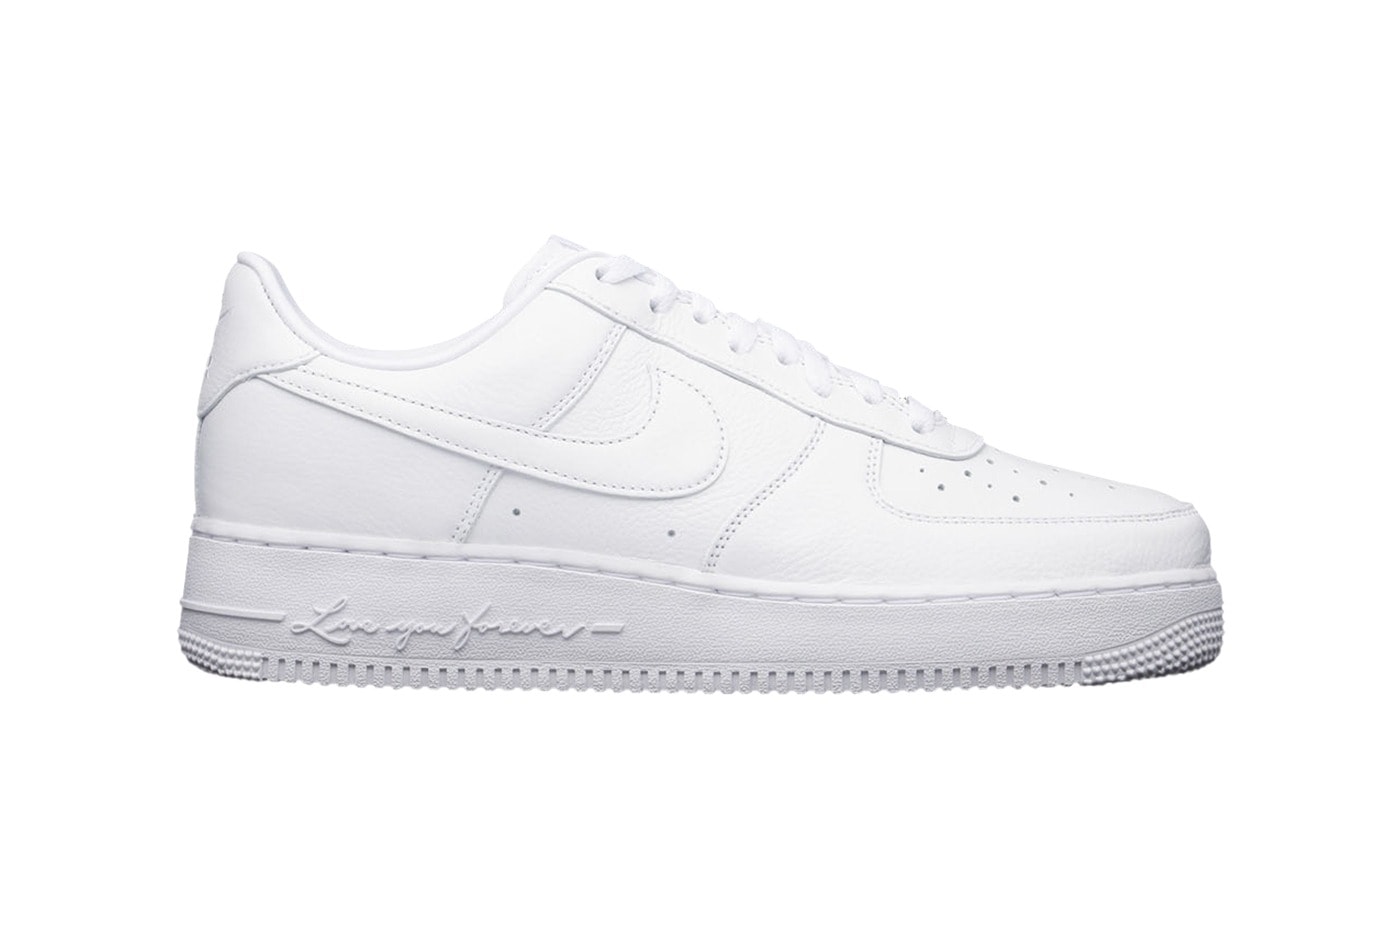 NOCTA x Nike Air Force 1 Low 全新聯名鞋款「Love You Forever」正式登場